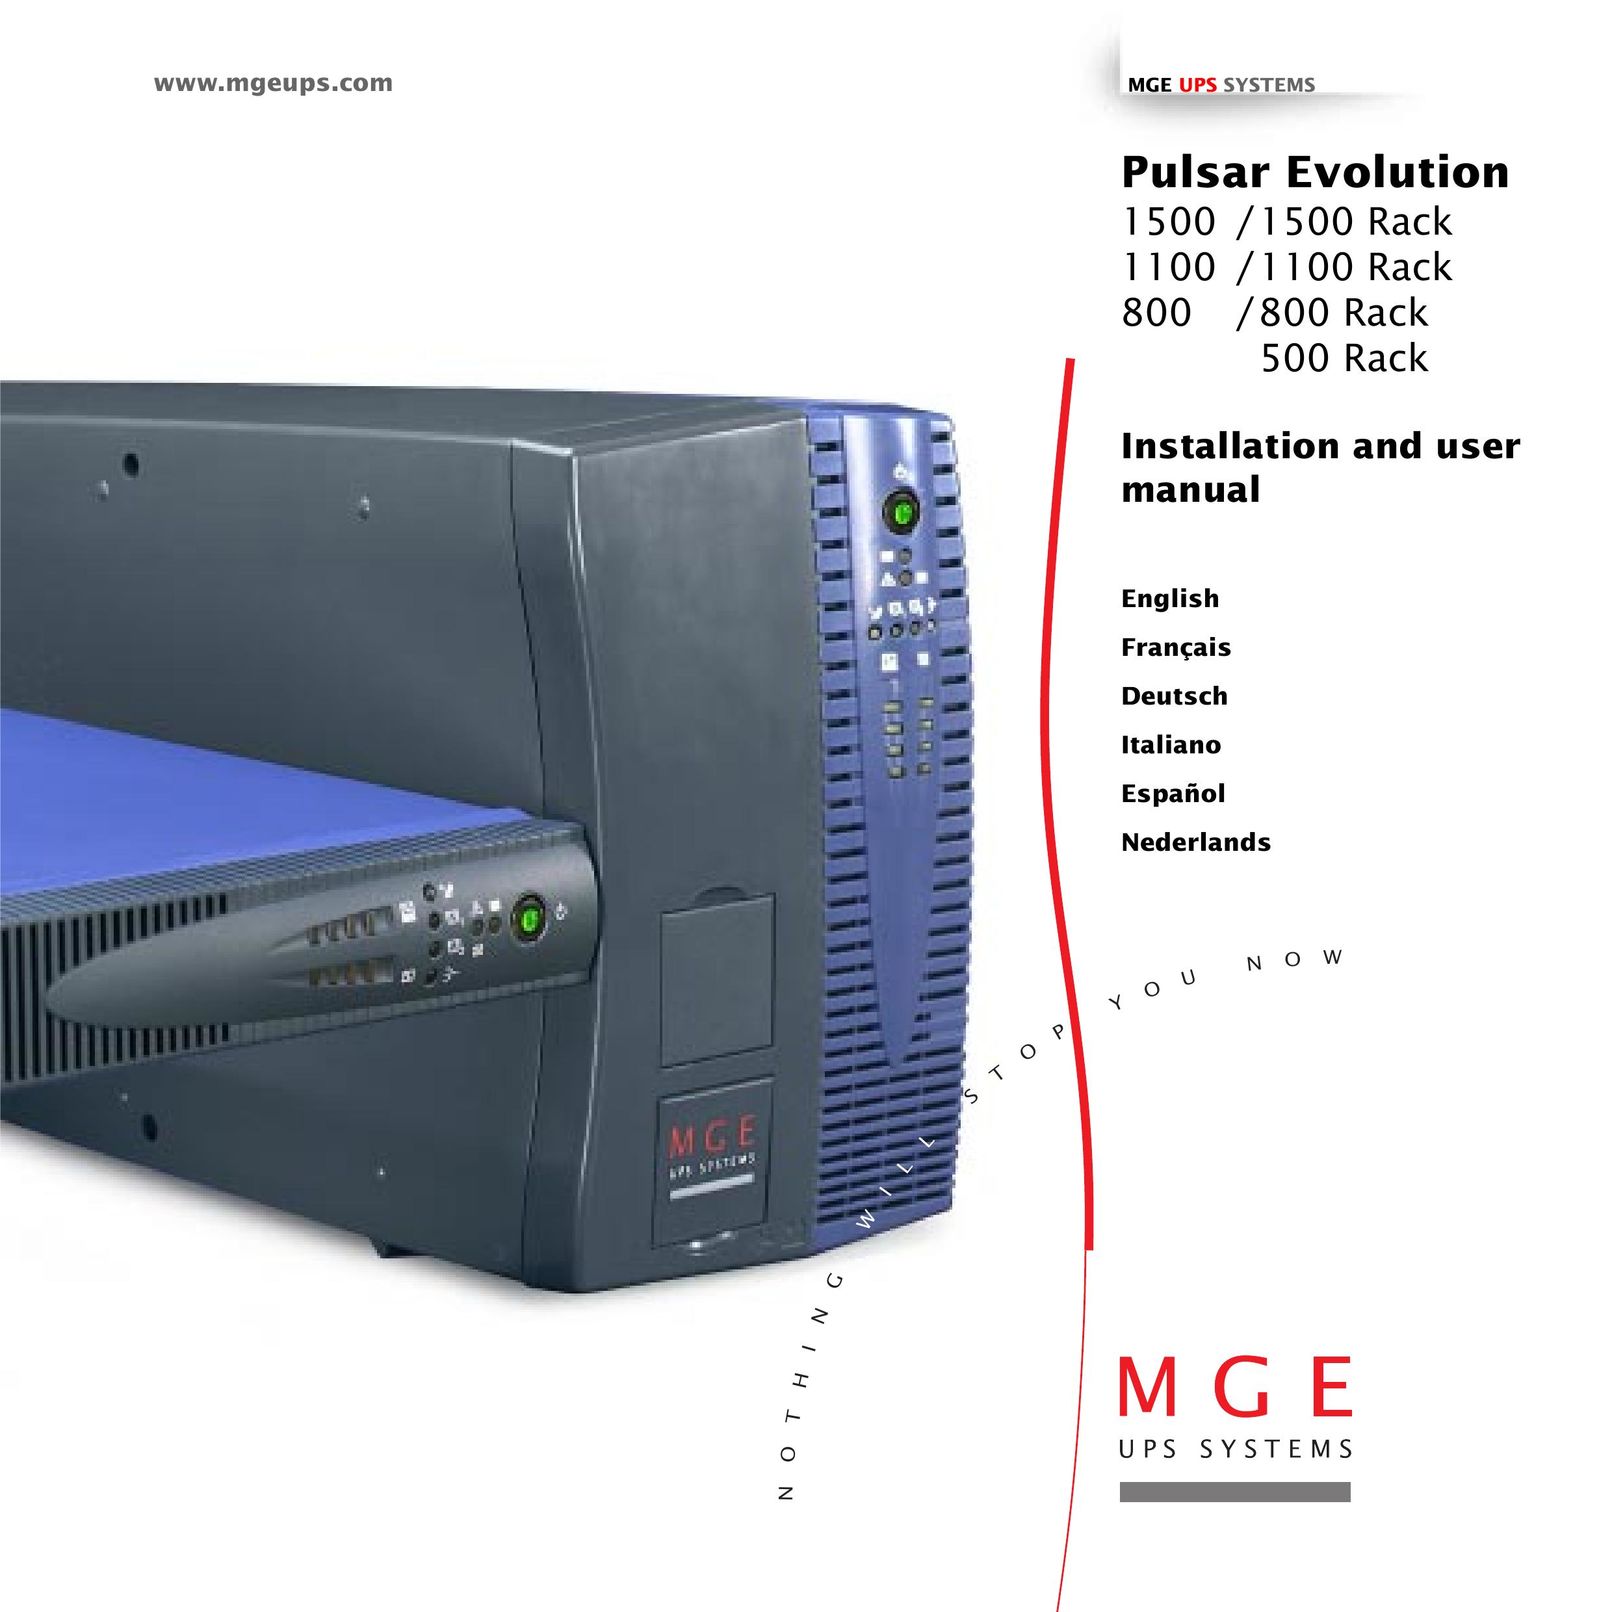 MGE UPS Systems 1100 Rack Power Supply User Manual